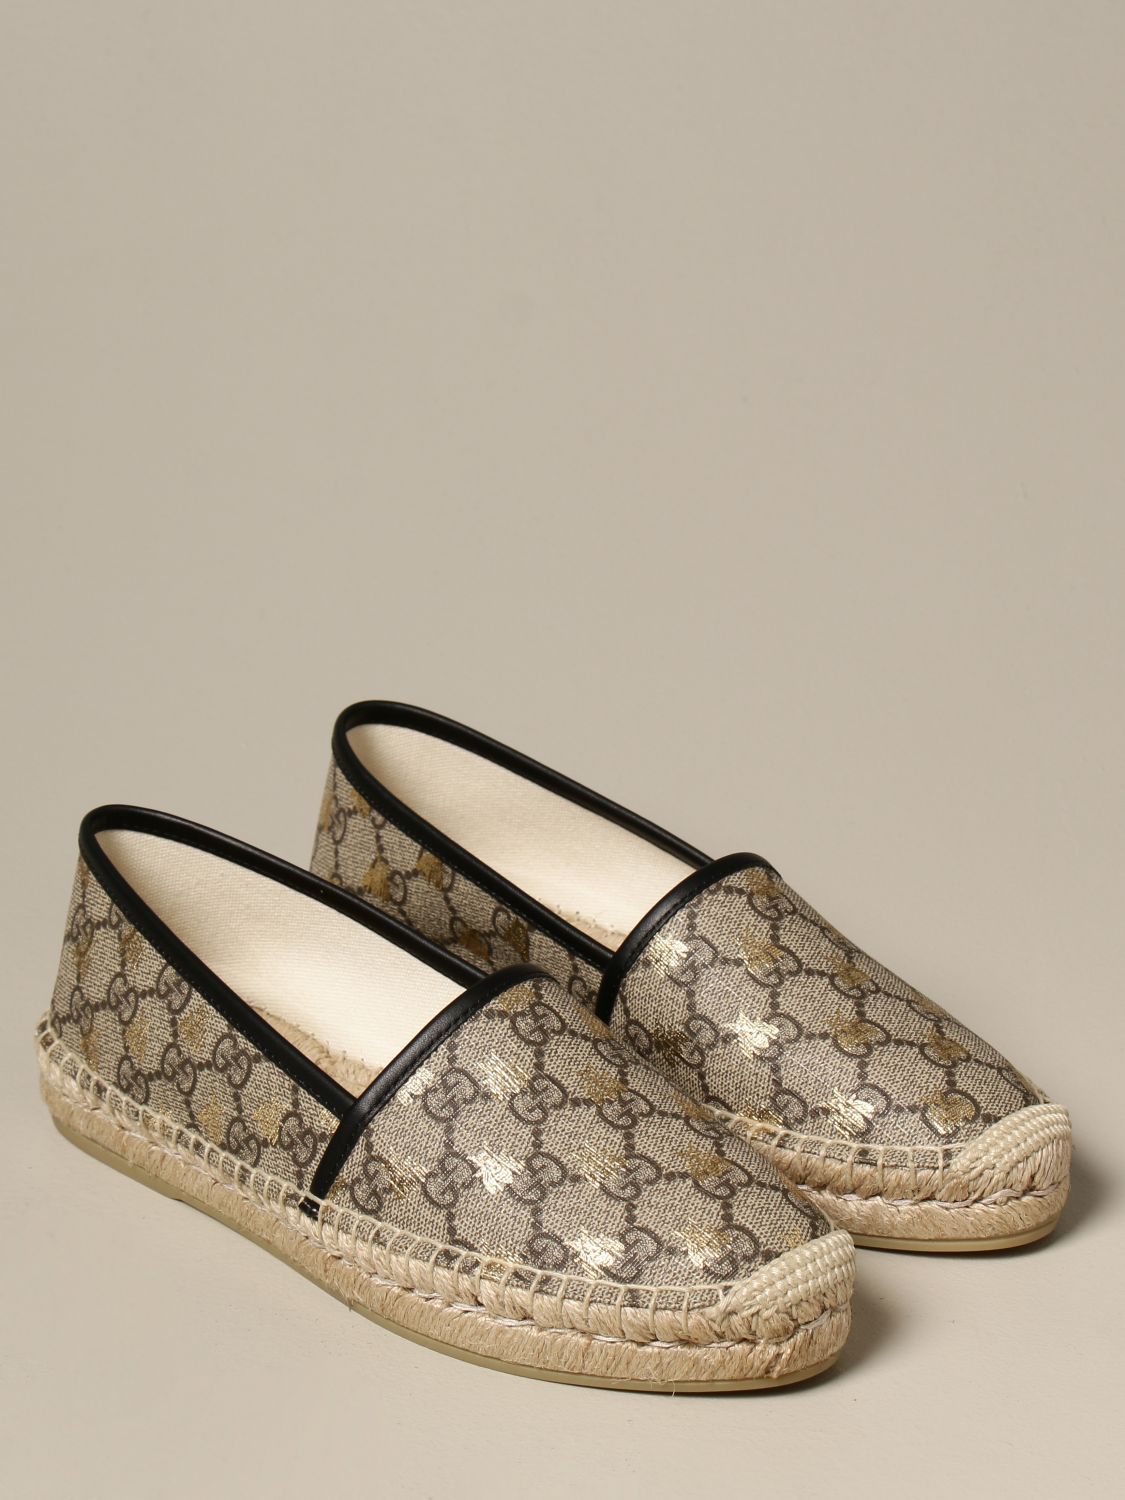 GUCCI: espadrilles in GG Supreme fabric with bees - Beige | Gucci ...